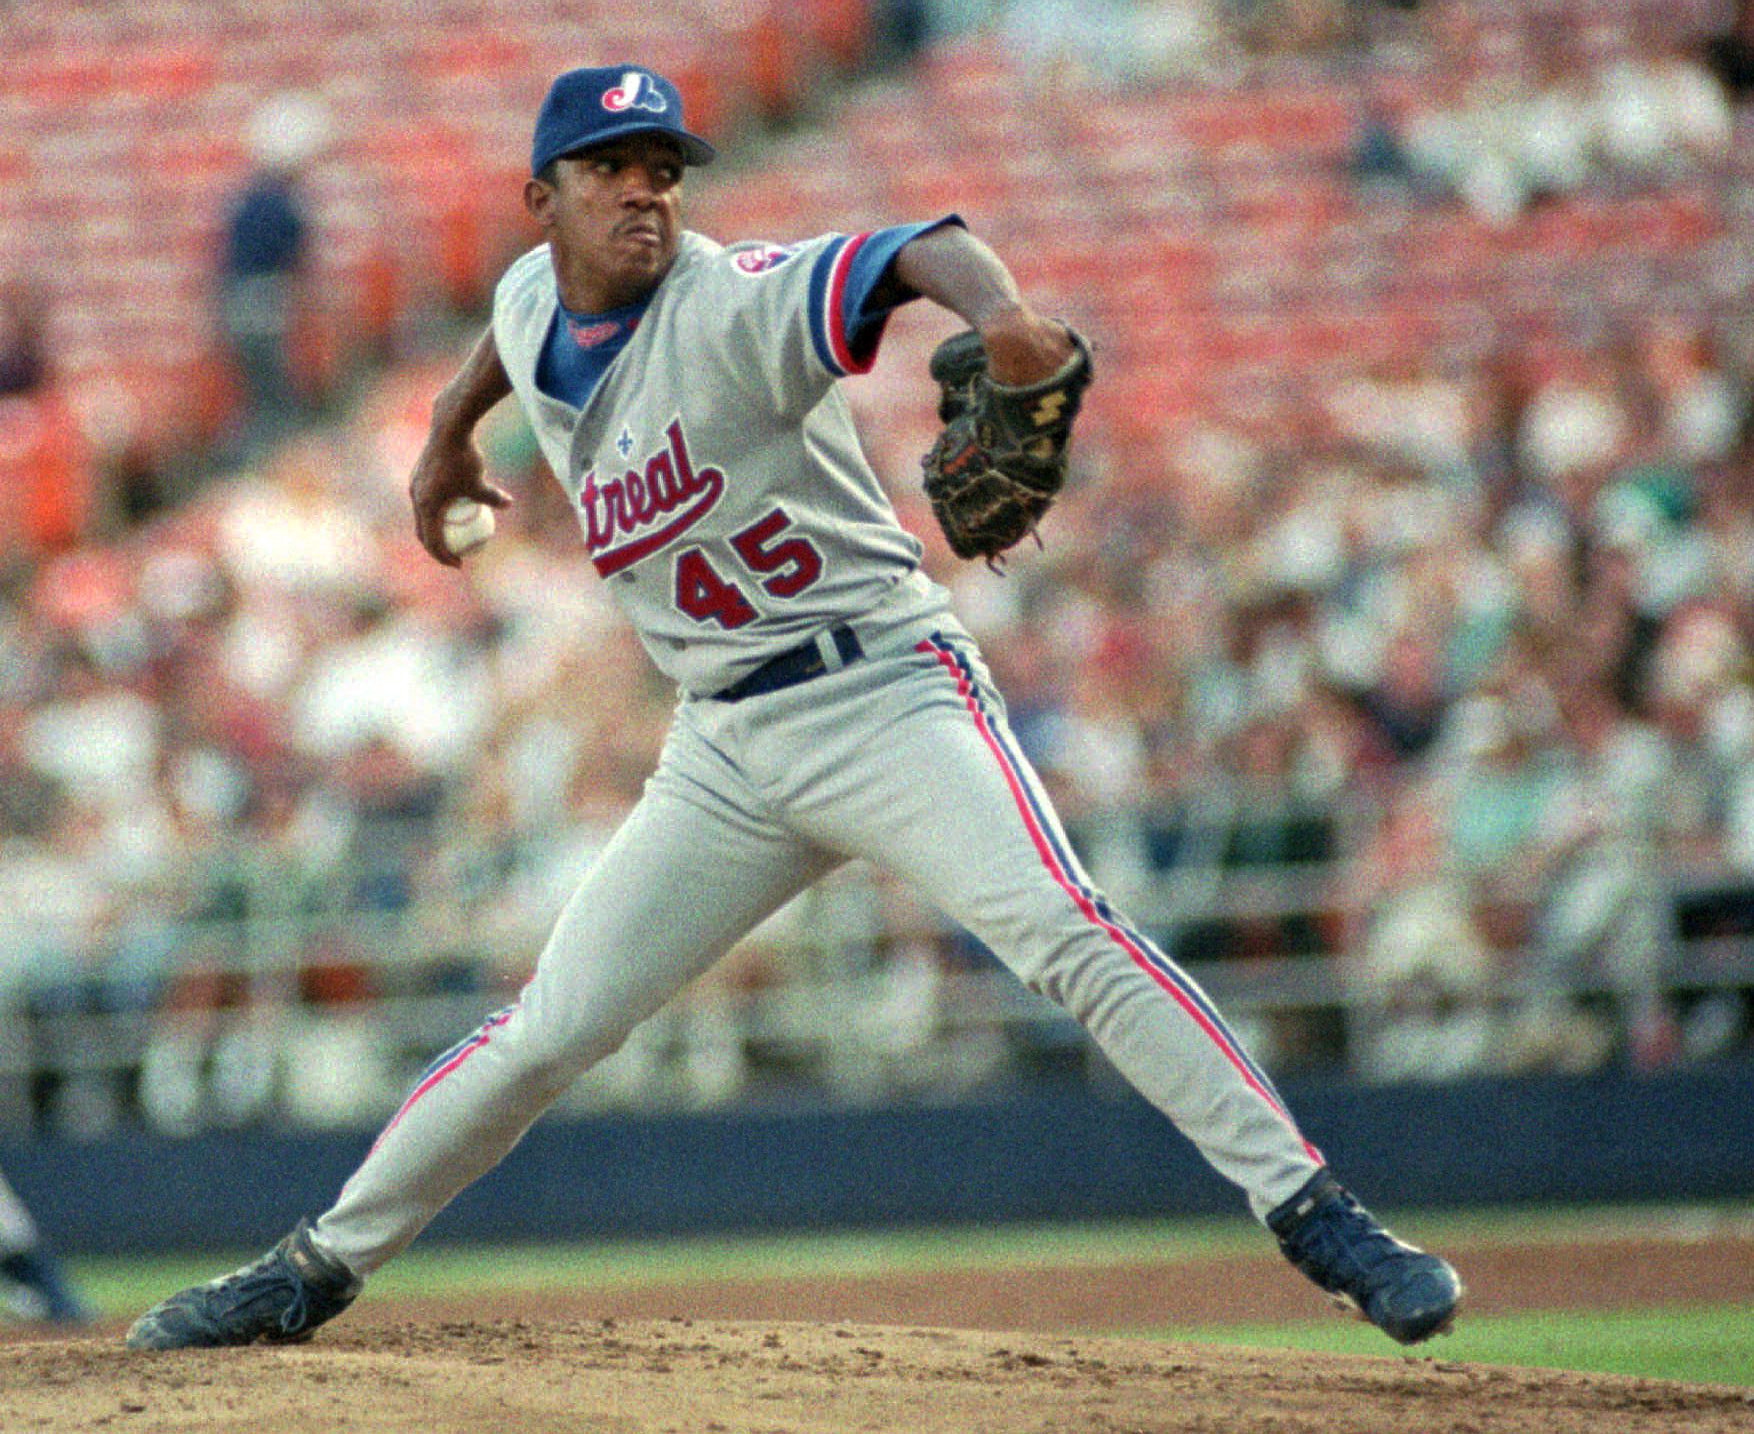 Throwback Expos day at D.C. baseball game divides Montrealers and Americans  - Montreal